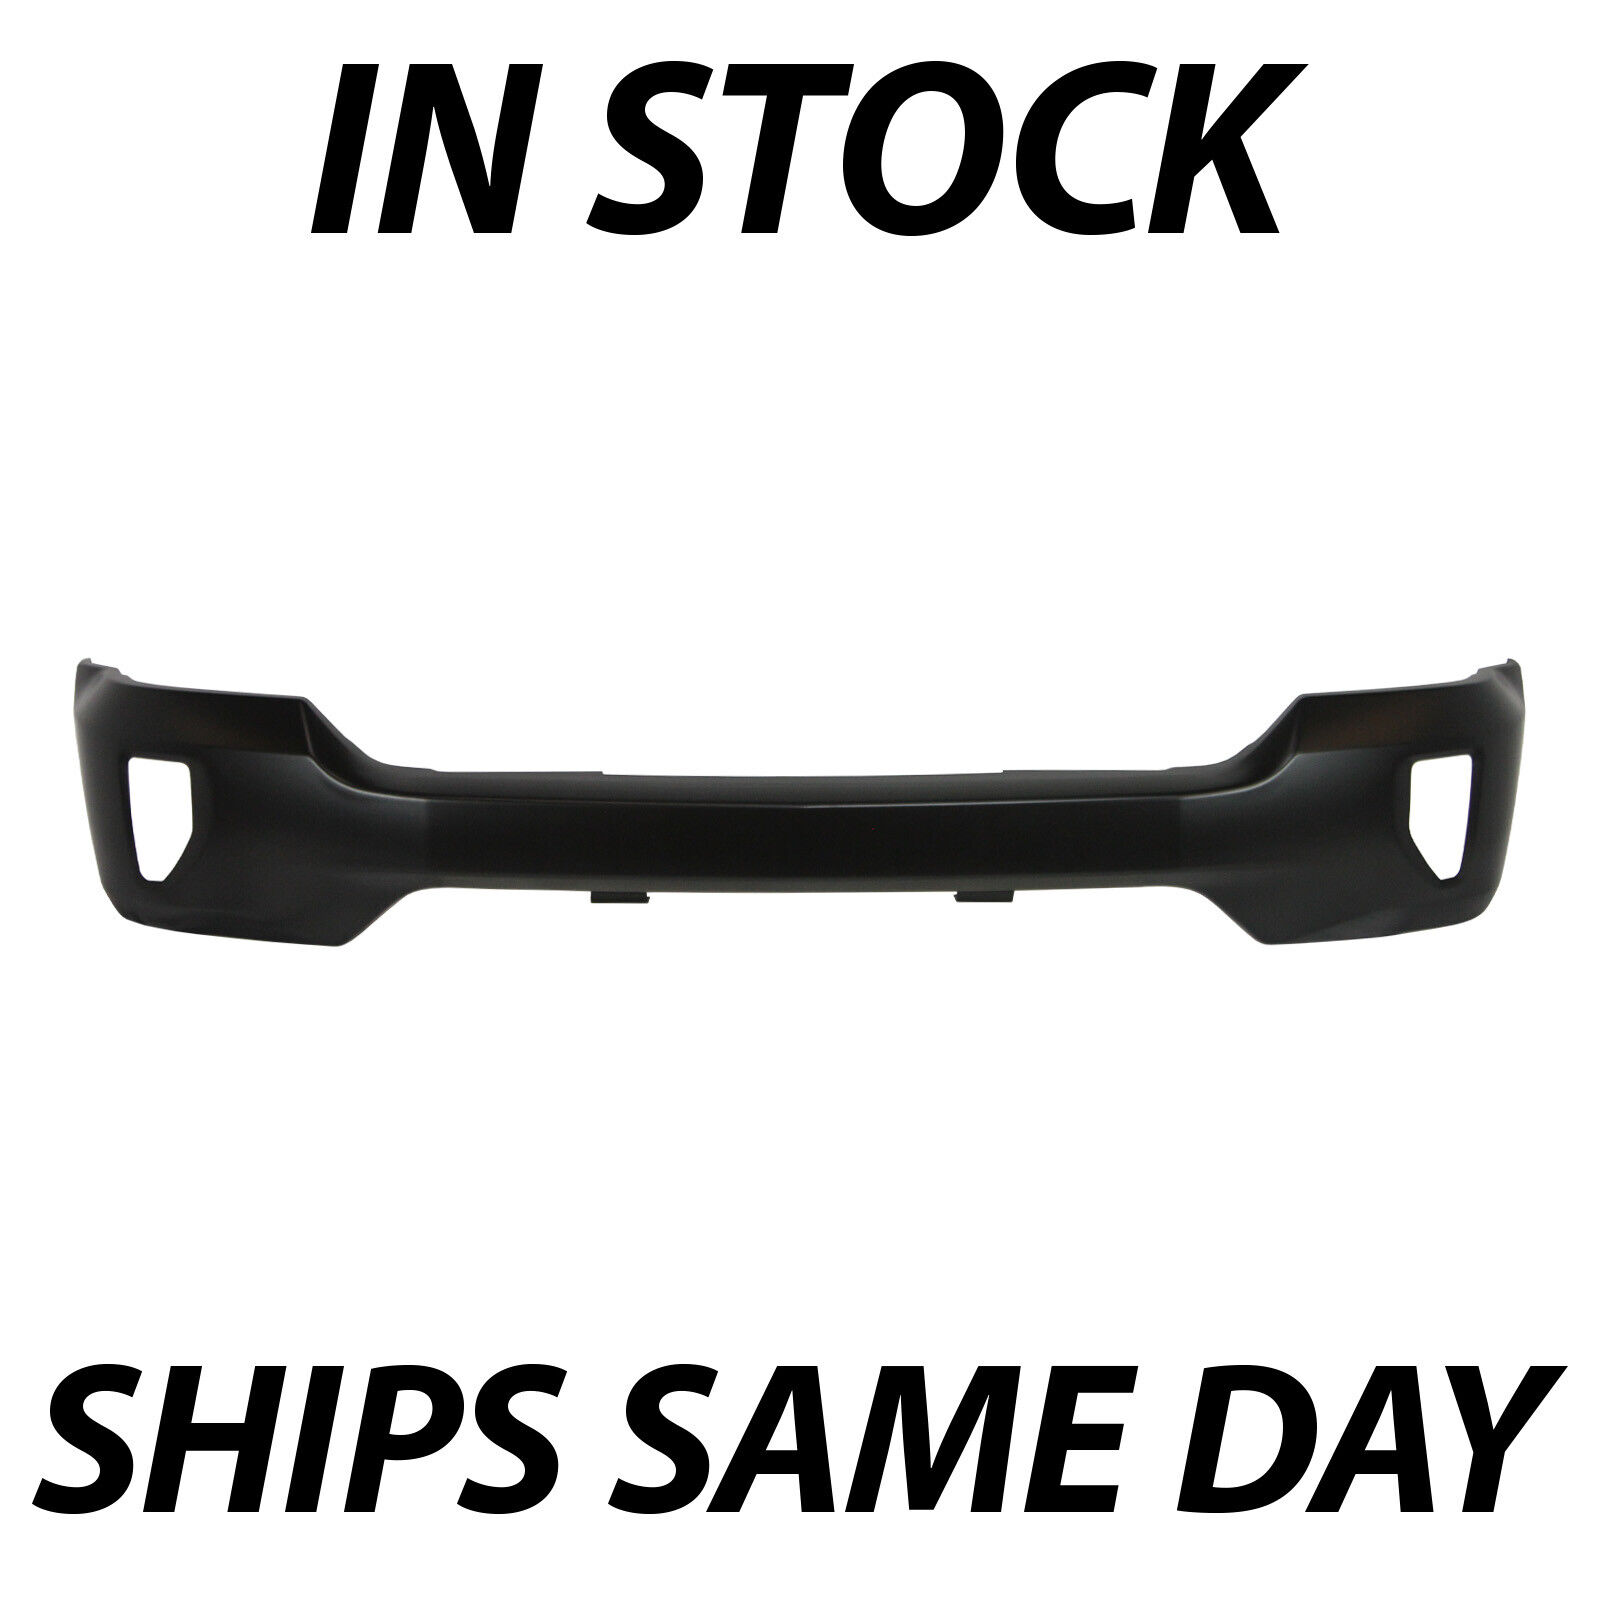 NEW Primered Steel - Front Bumper Face Bar for 2016-2018 Chevy Silverado w/ Fog